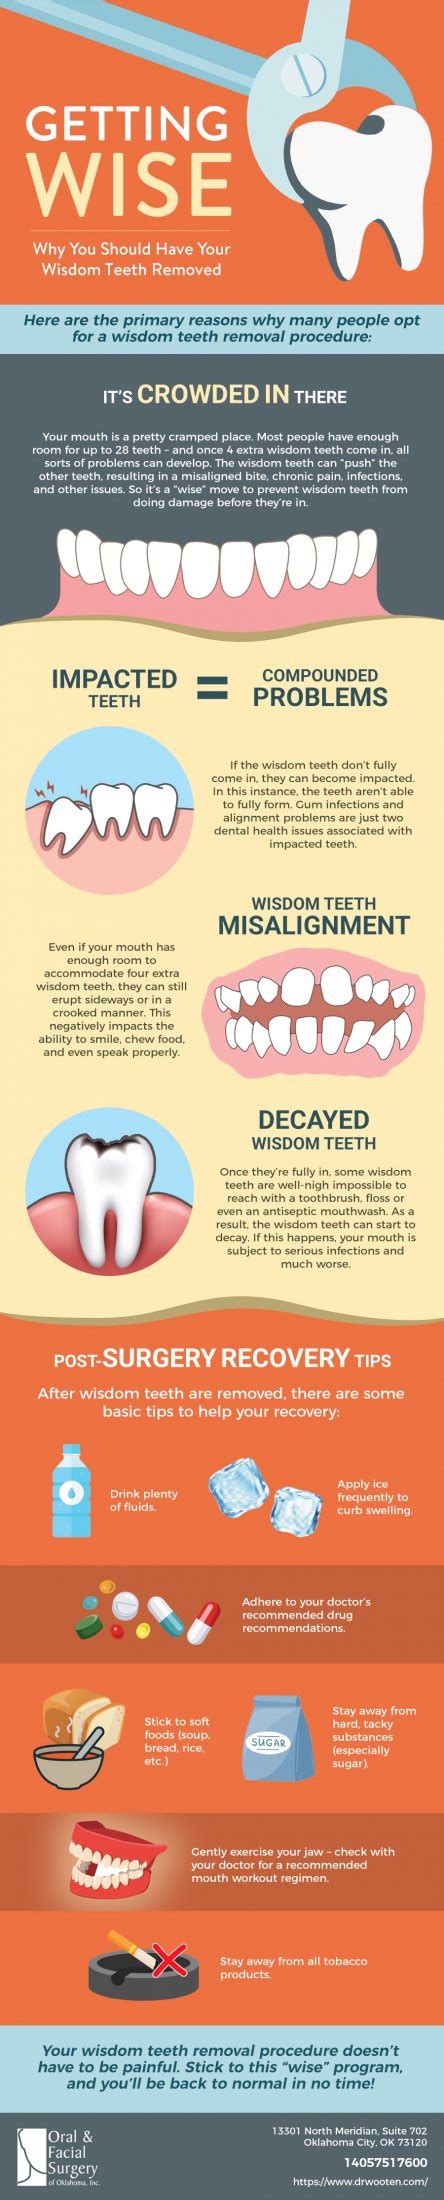 Getting Wise Why You Should Have Your Wisdom Teeth Removed